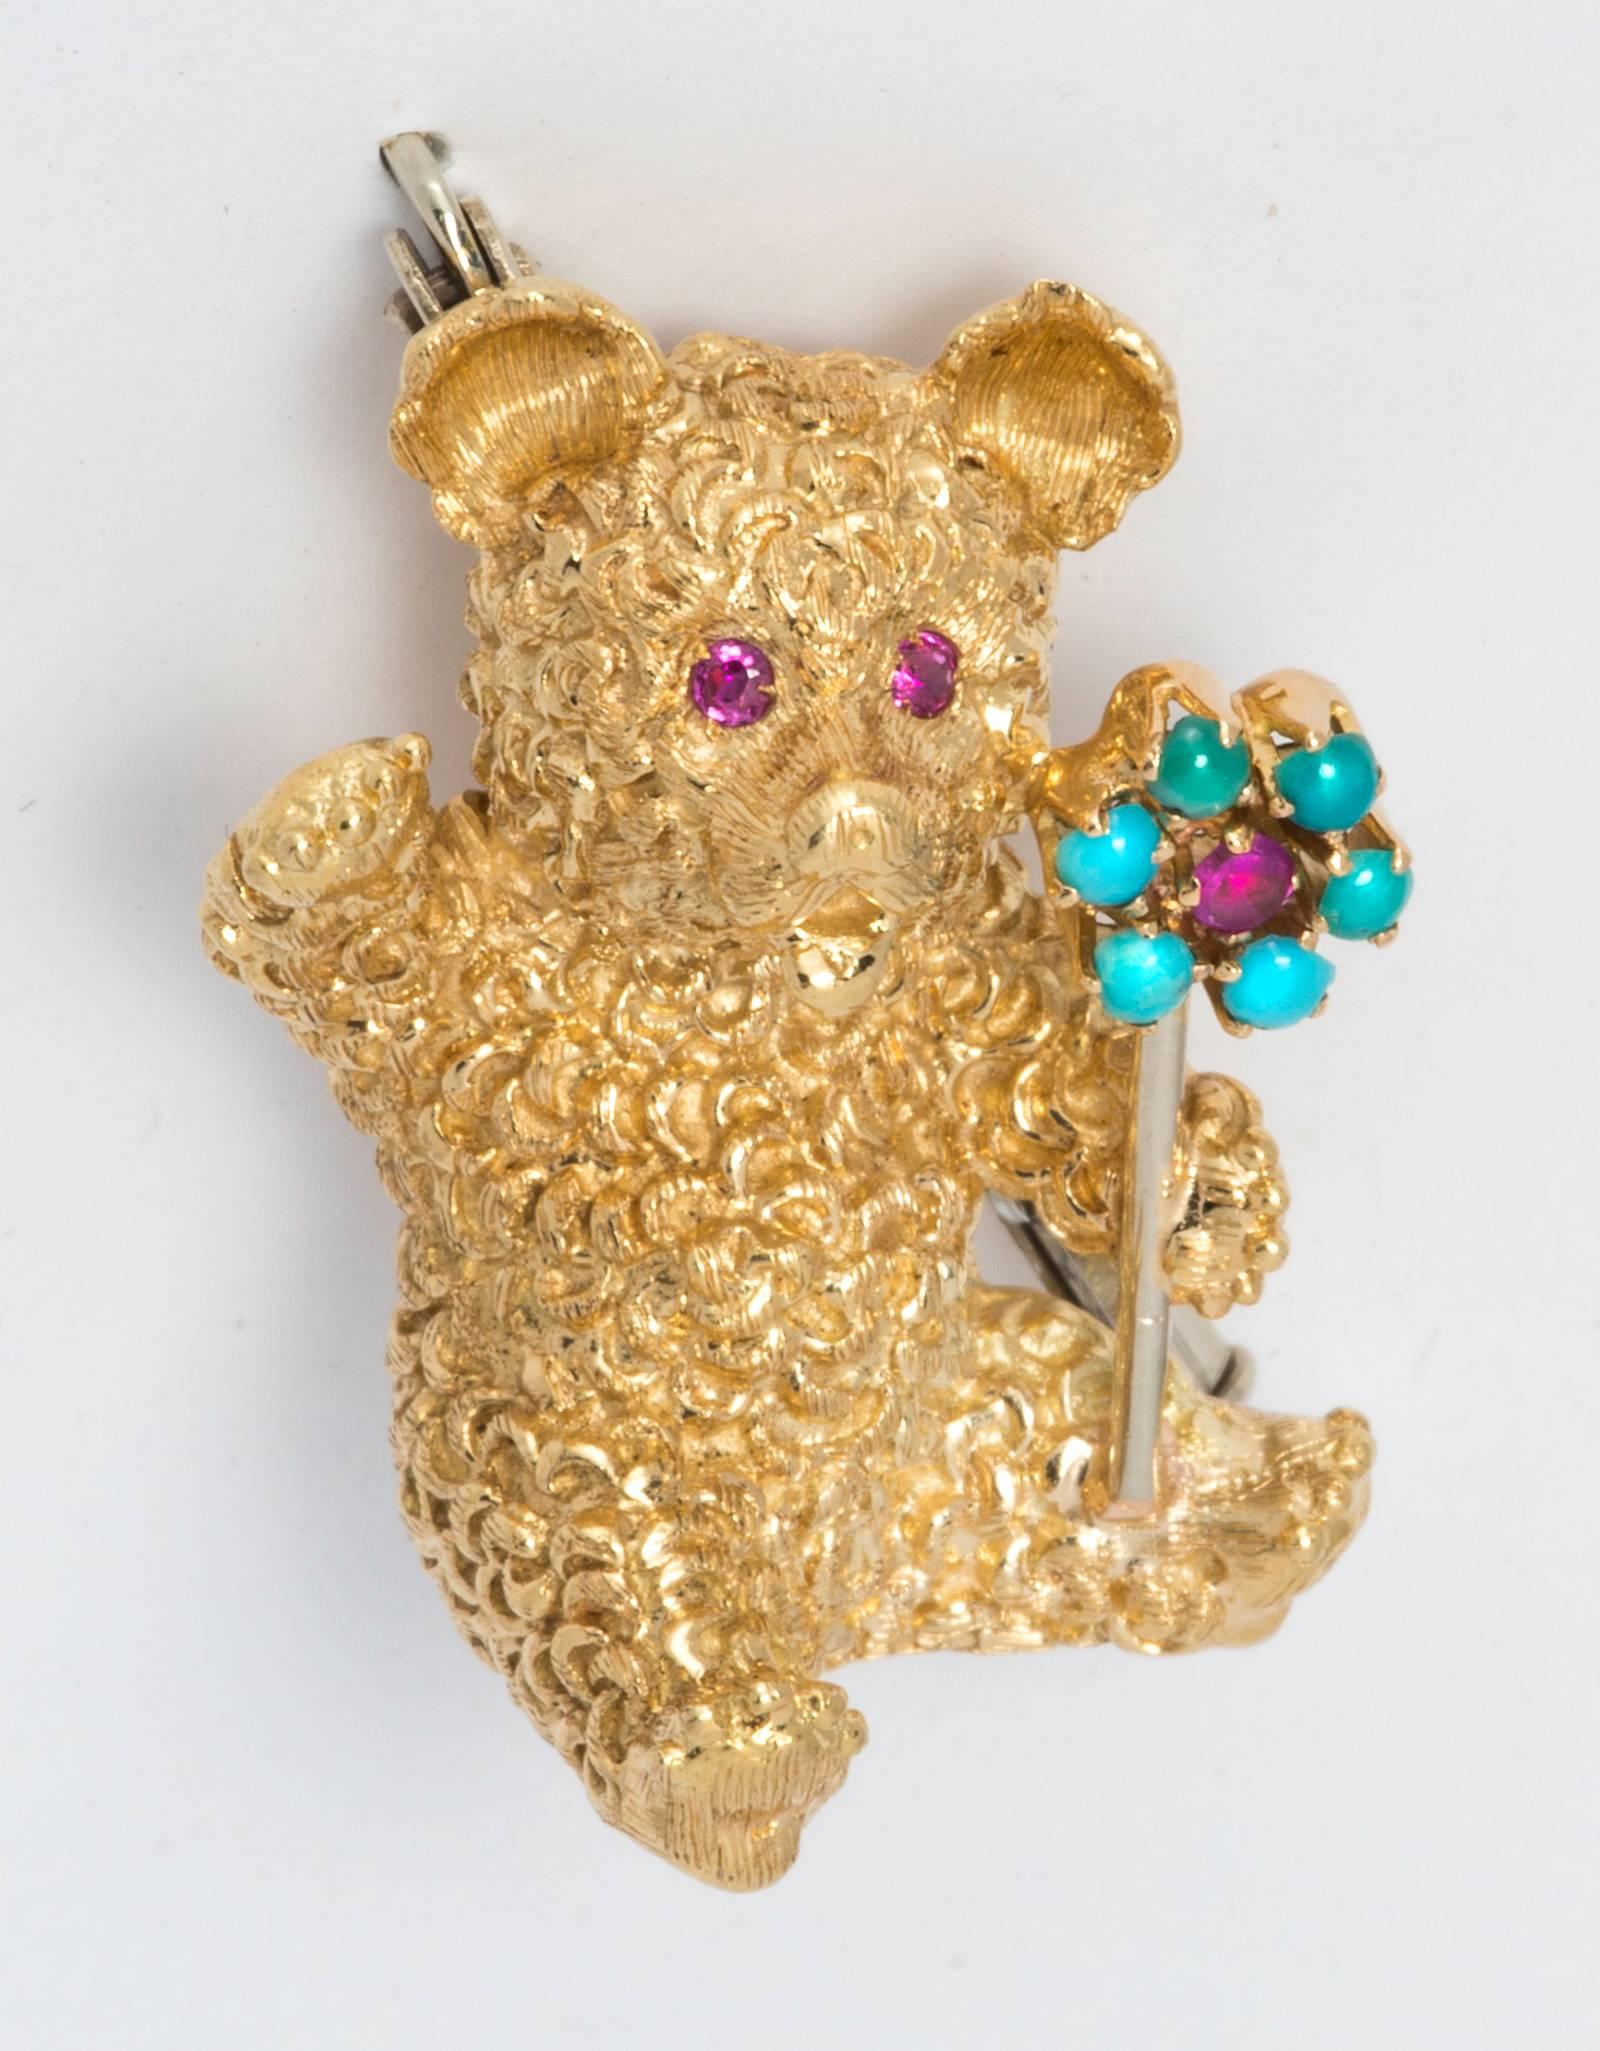 Very charming Teddy Bear waving, holding a flower.
Cartier Italy, 750, 18k yellow gold, ruby center turquoise flower, and ruby eyes.
14.5g.  1